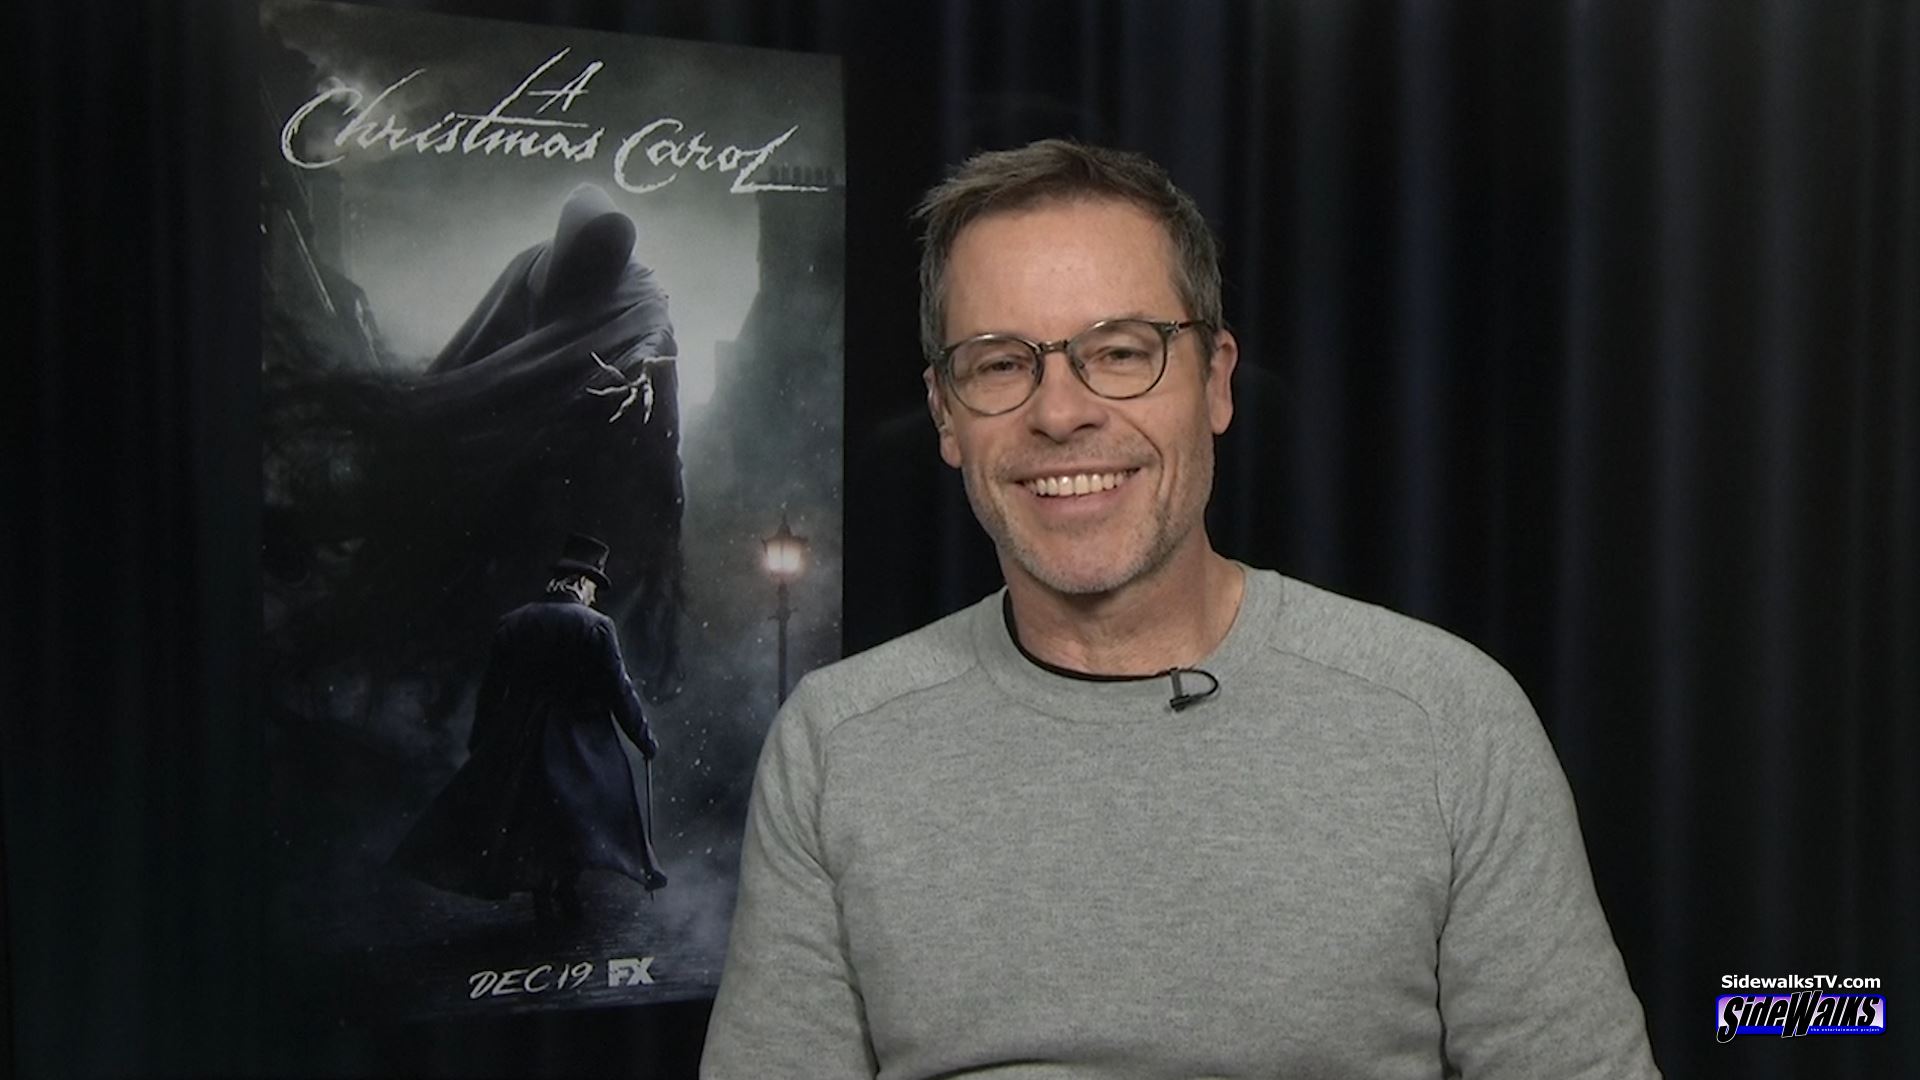 Guy Pearce appears in our Sidewalks interview